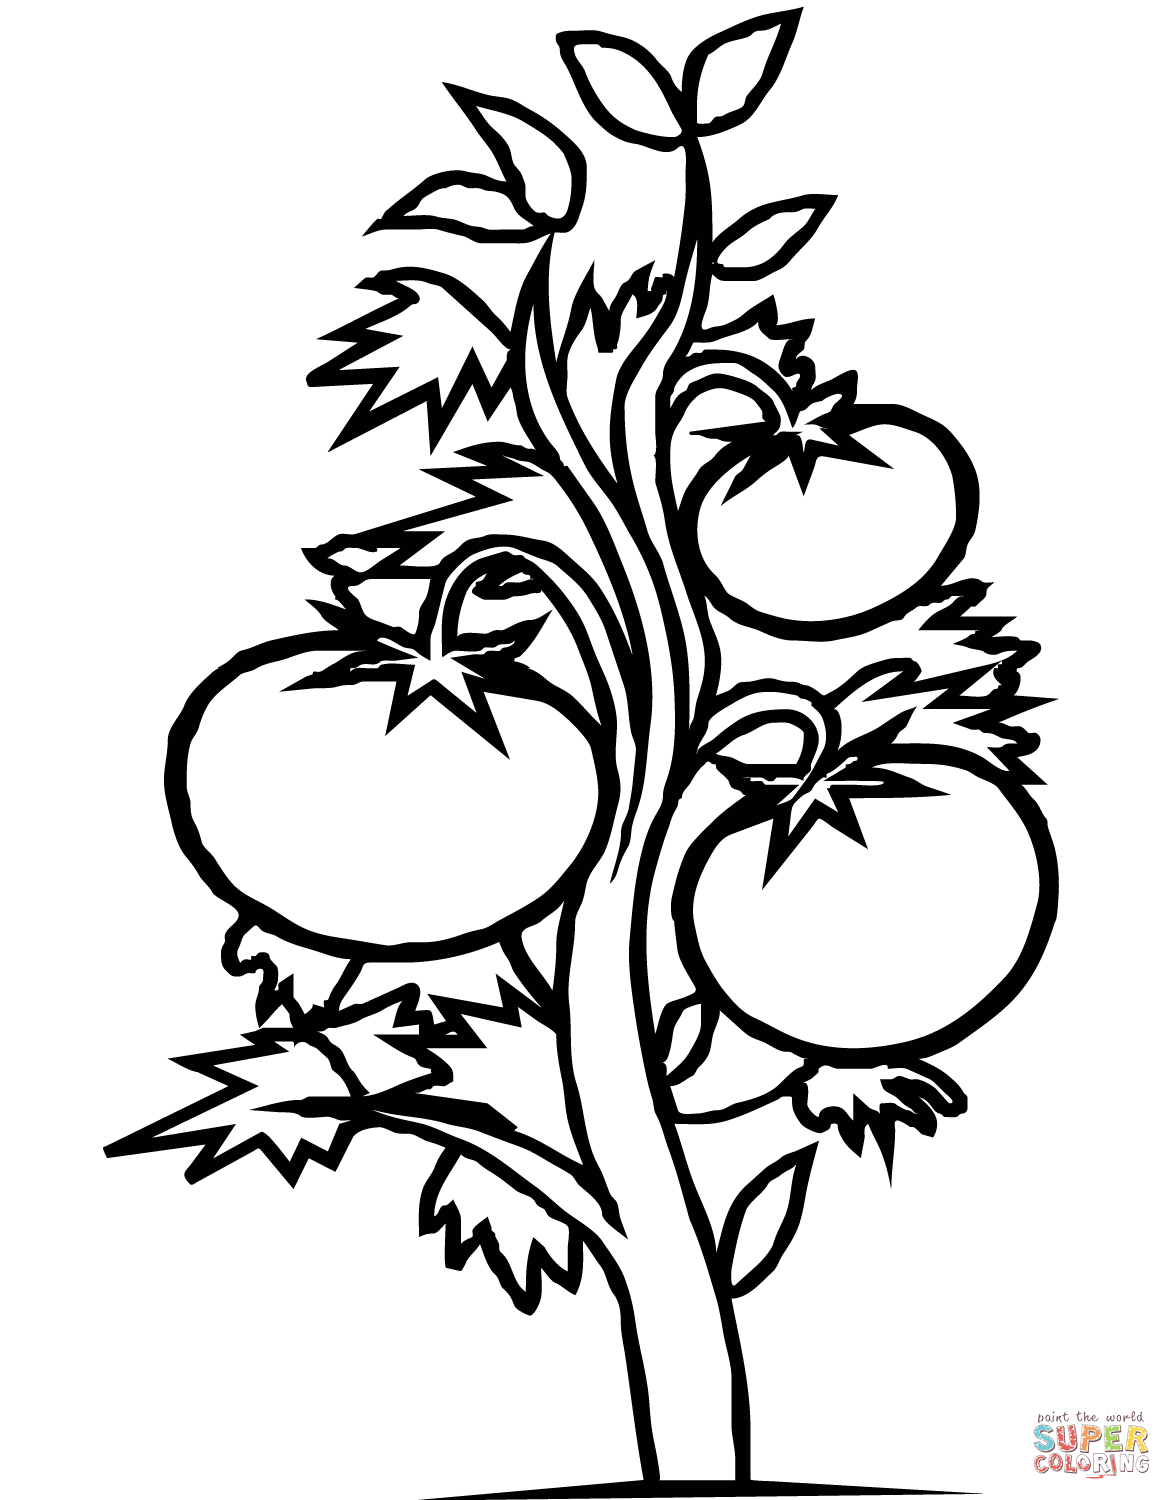 Tomato Plant coloring page | Free Printable Coloring Pages